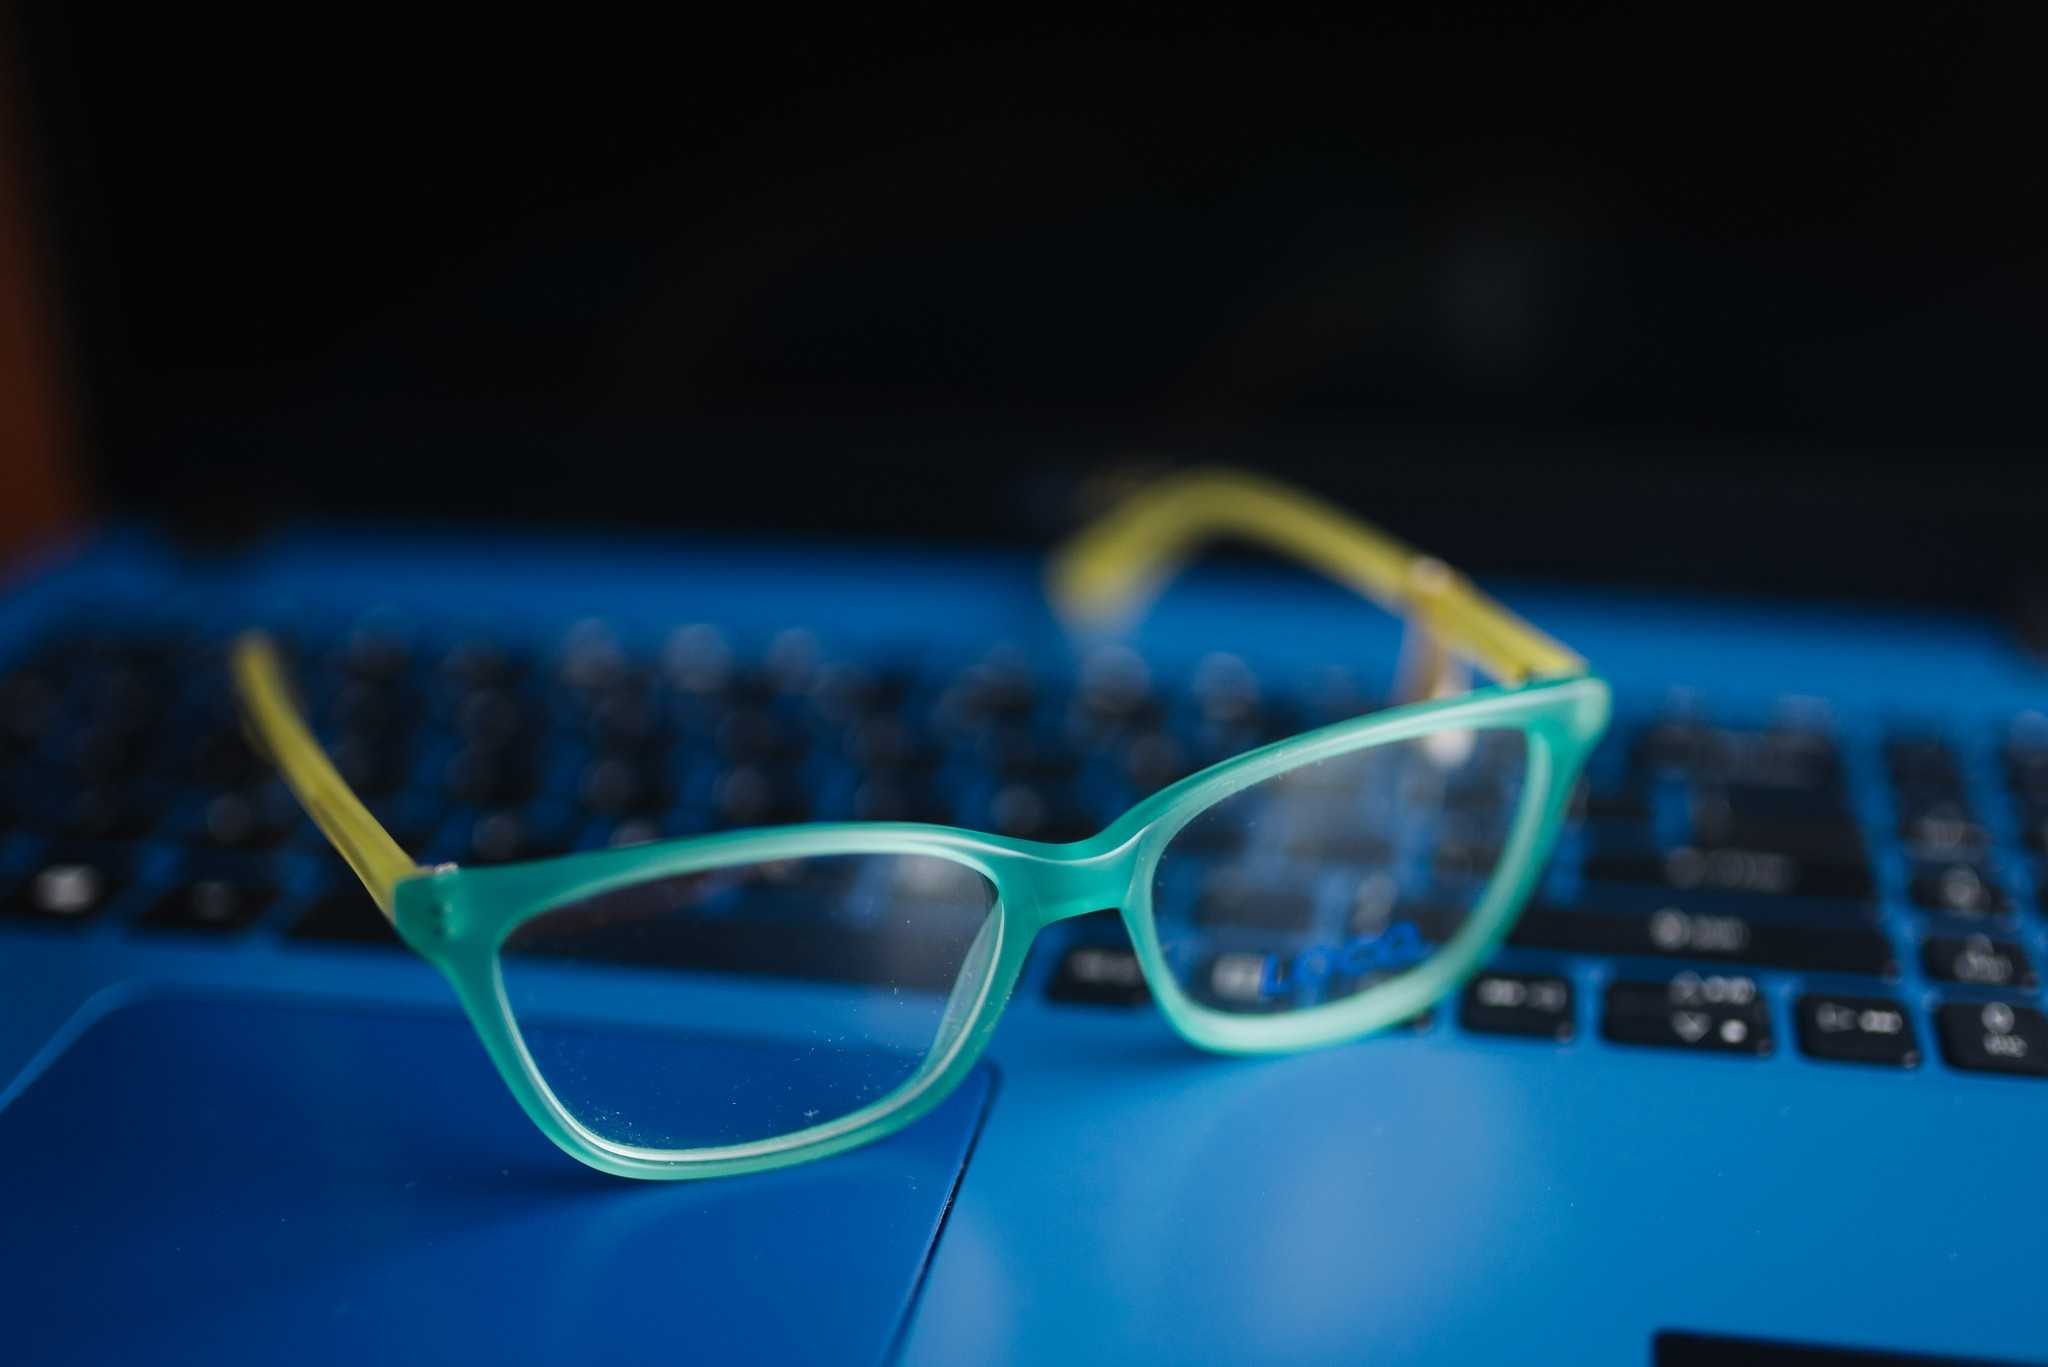 Close-up of the glasses with light blue frame on a blue laptop.